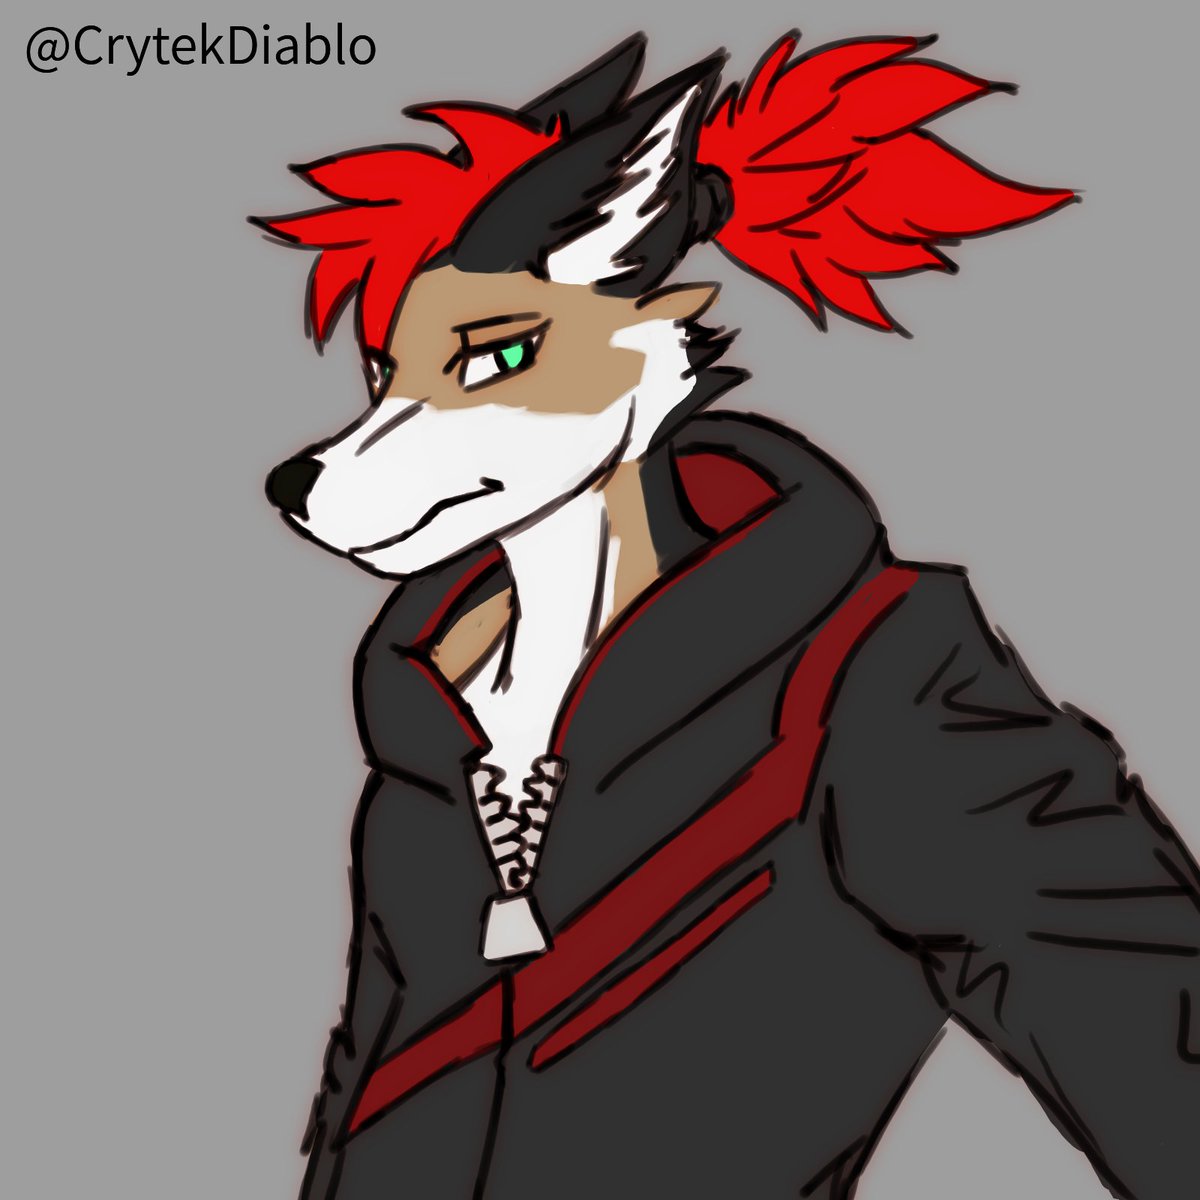 Here's your fortnite furry @CalierTheWolf